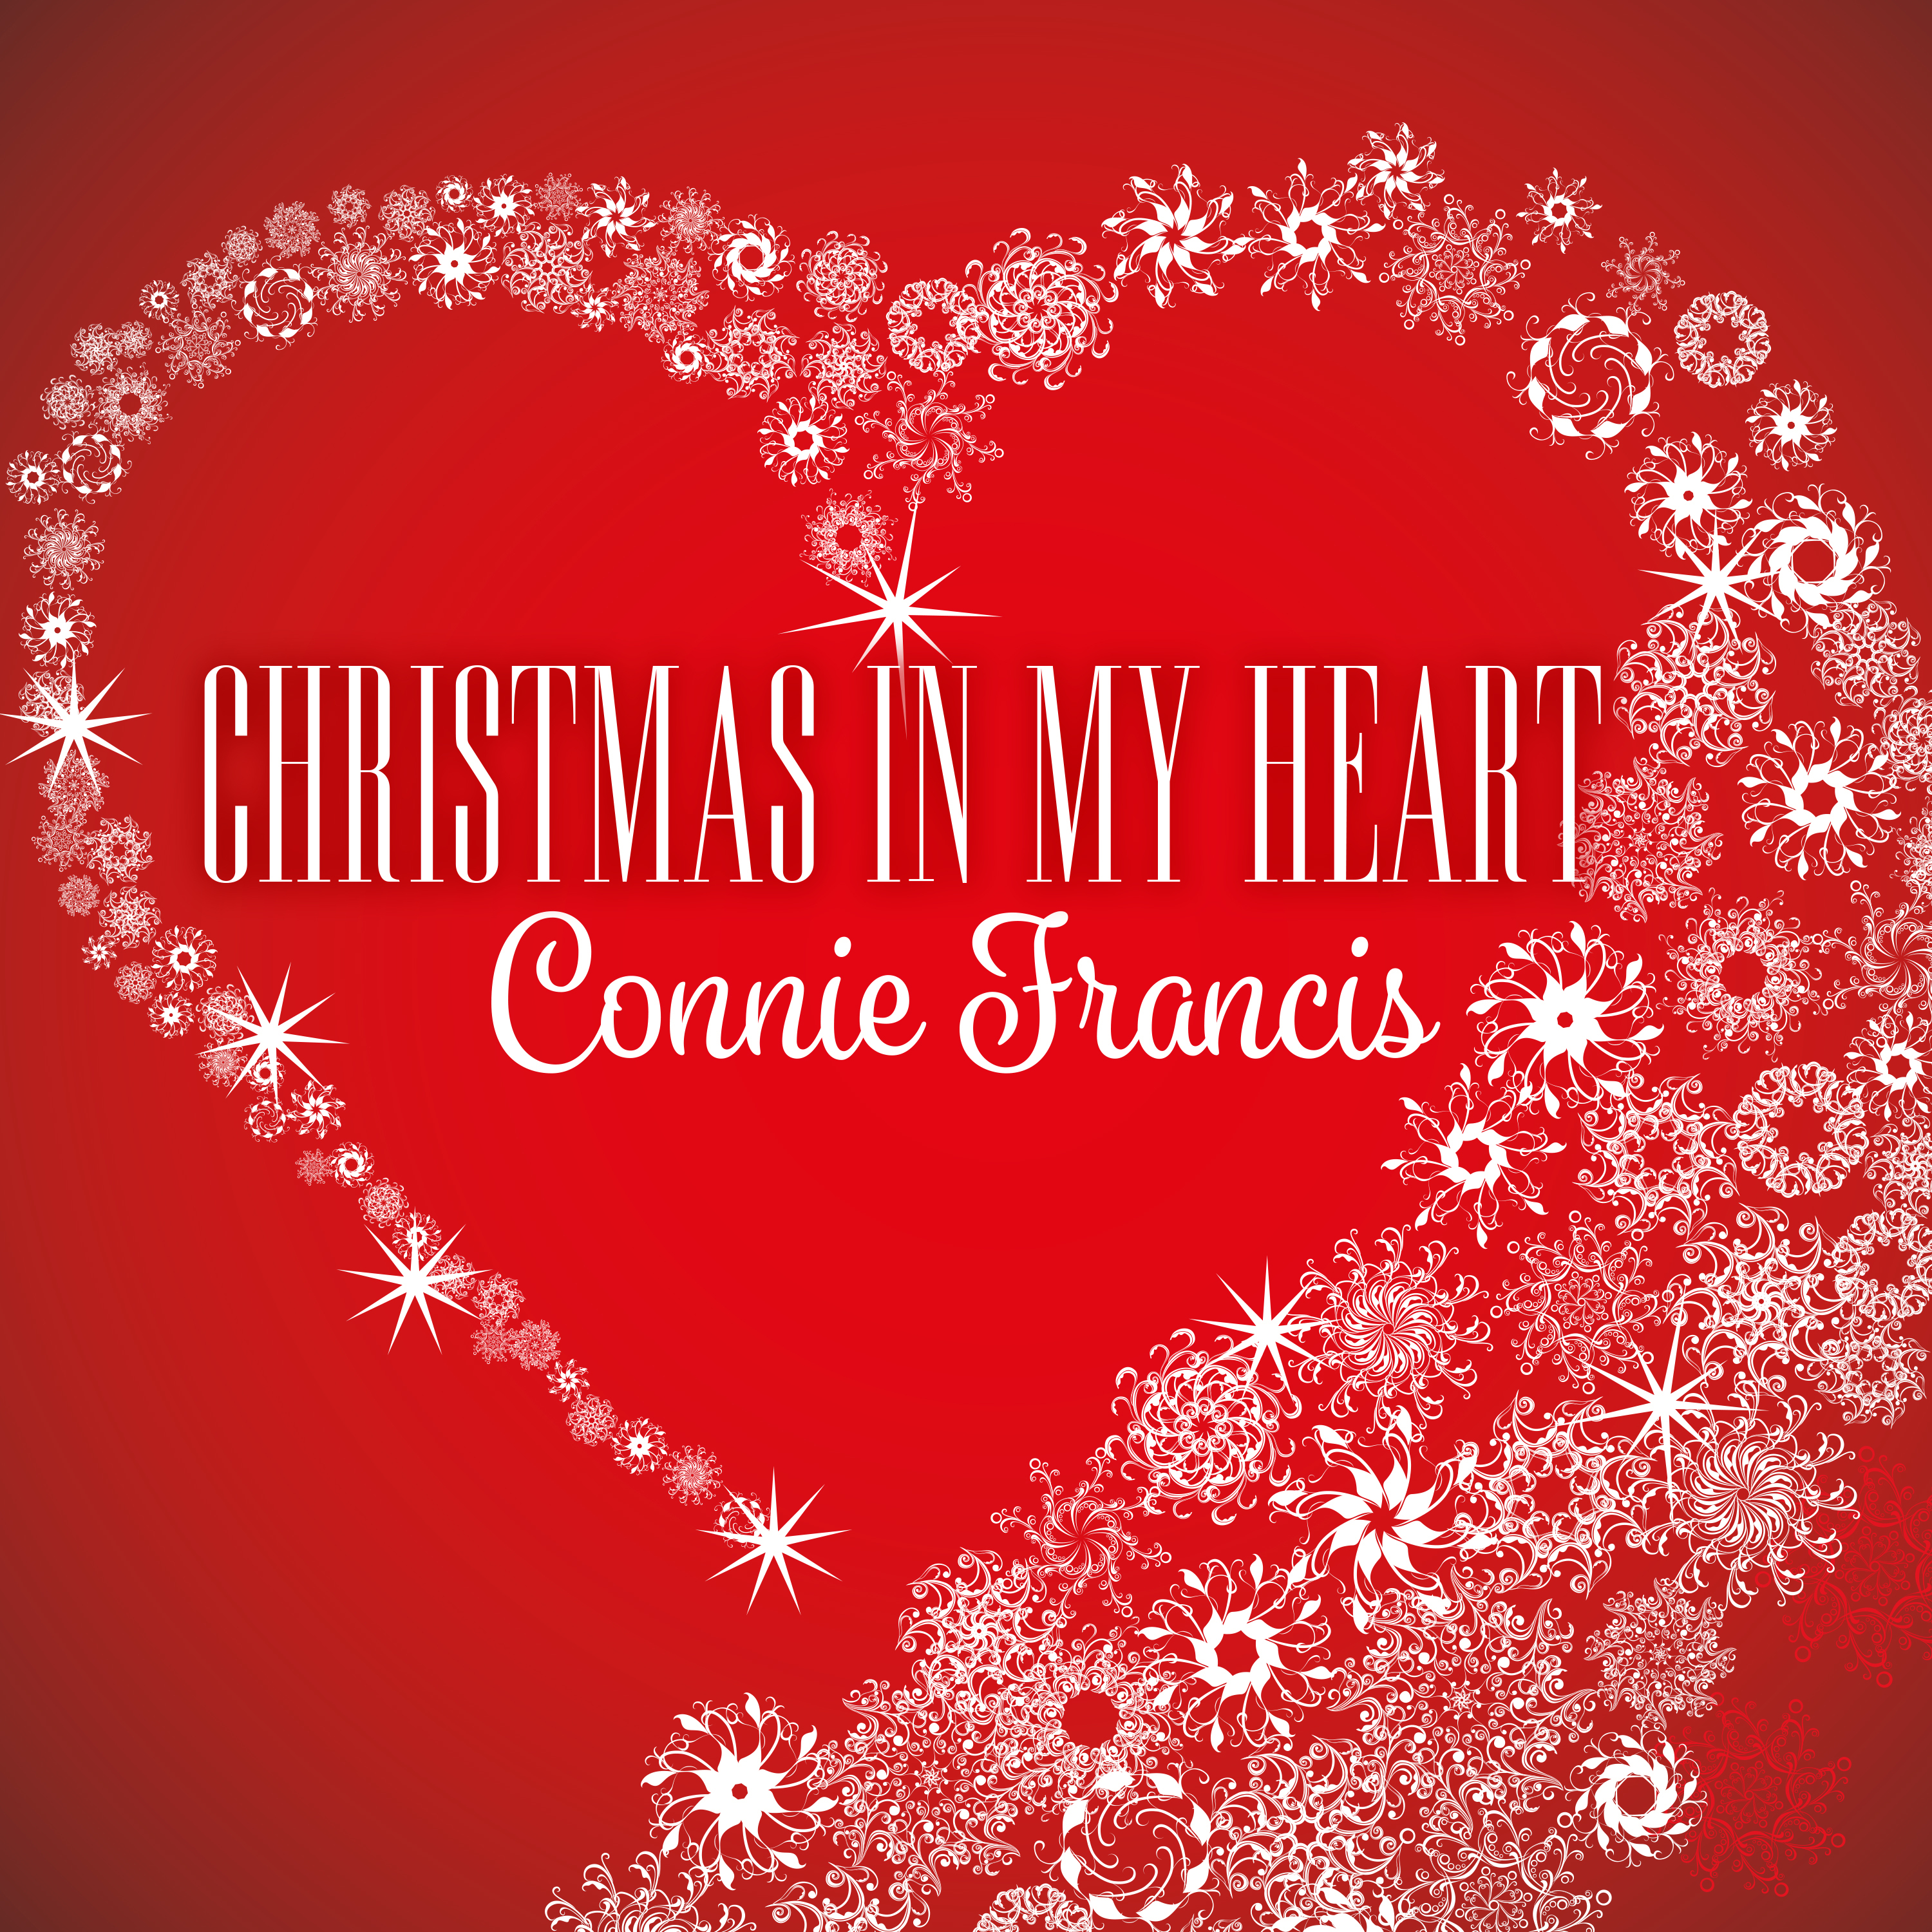 Christmas In My Heart (Special Edition)